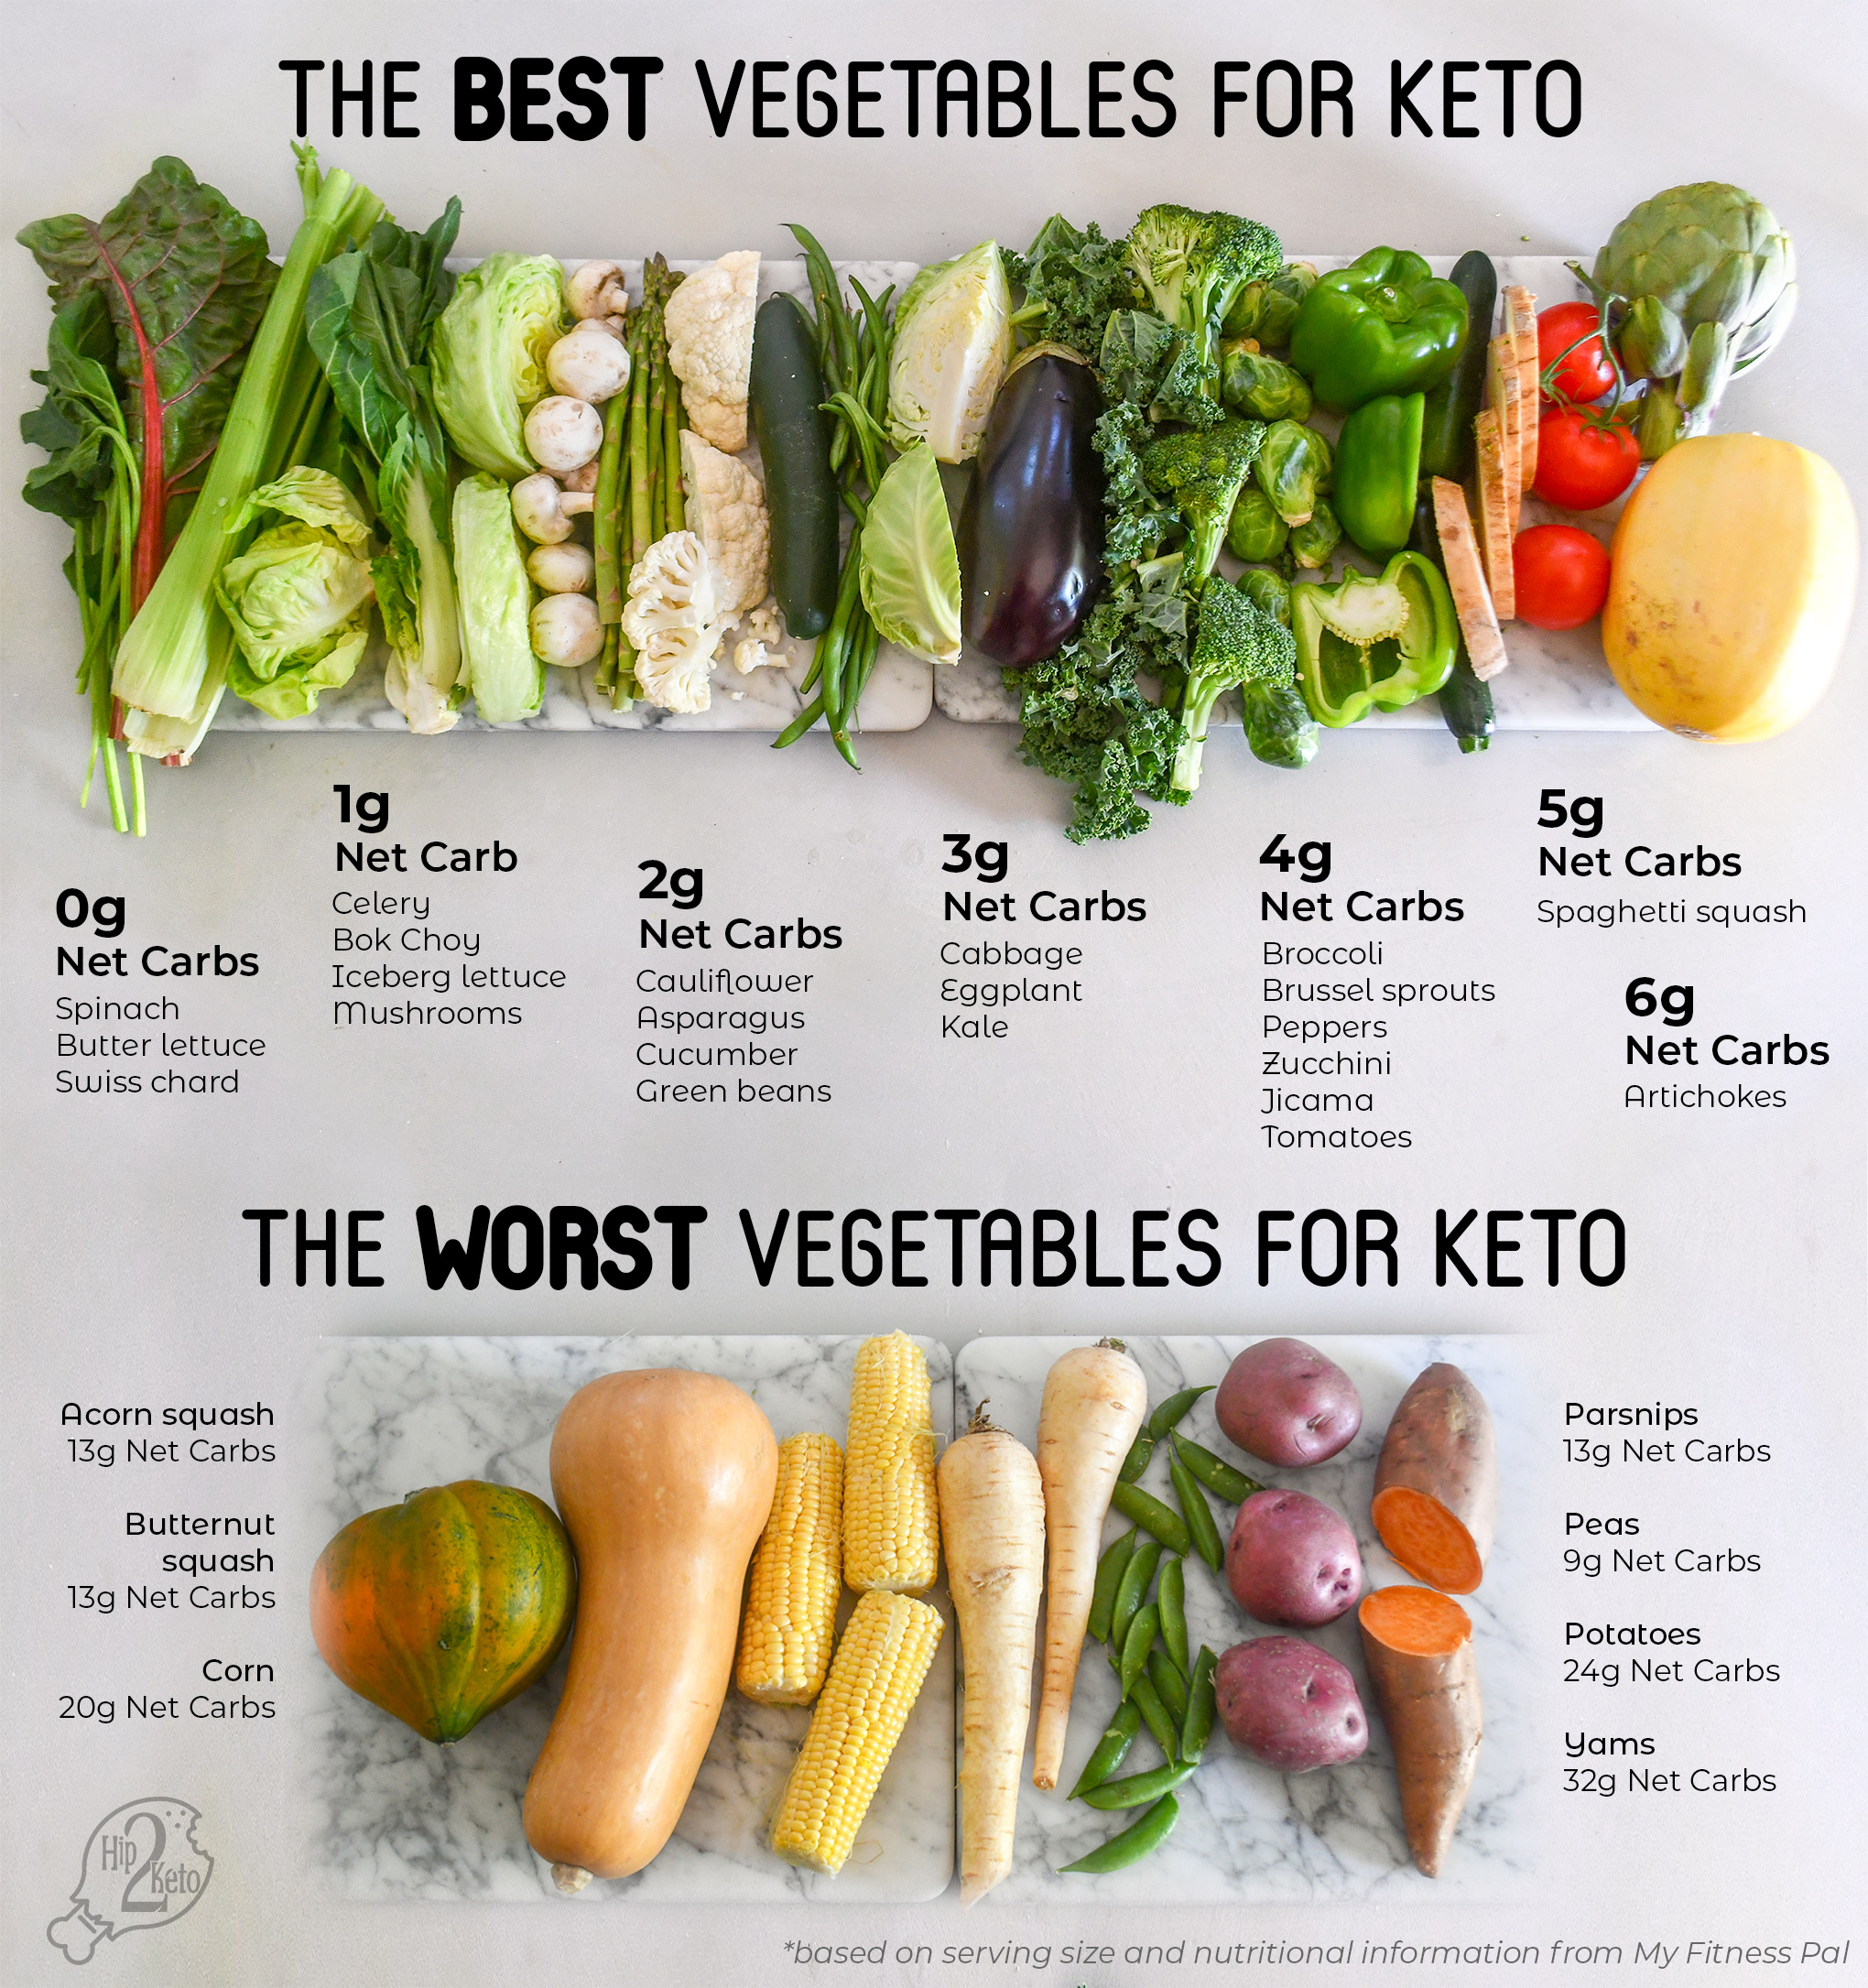 22 Best Keto Vegetables & 7 High-Carb Veggies to Ditch | Hip2Keto